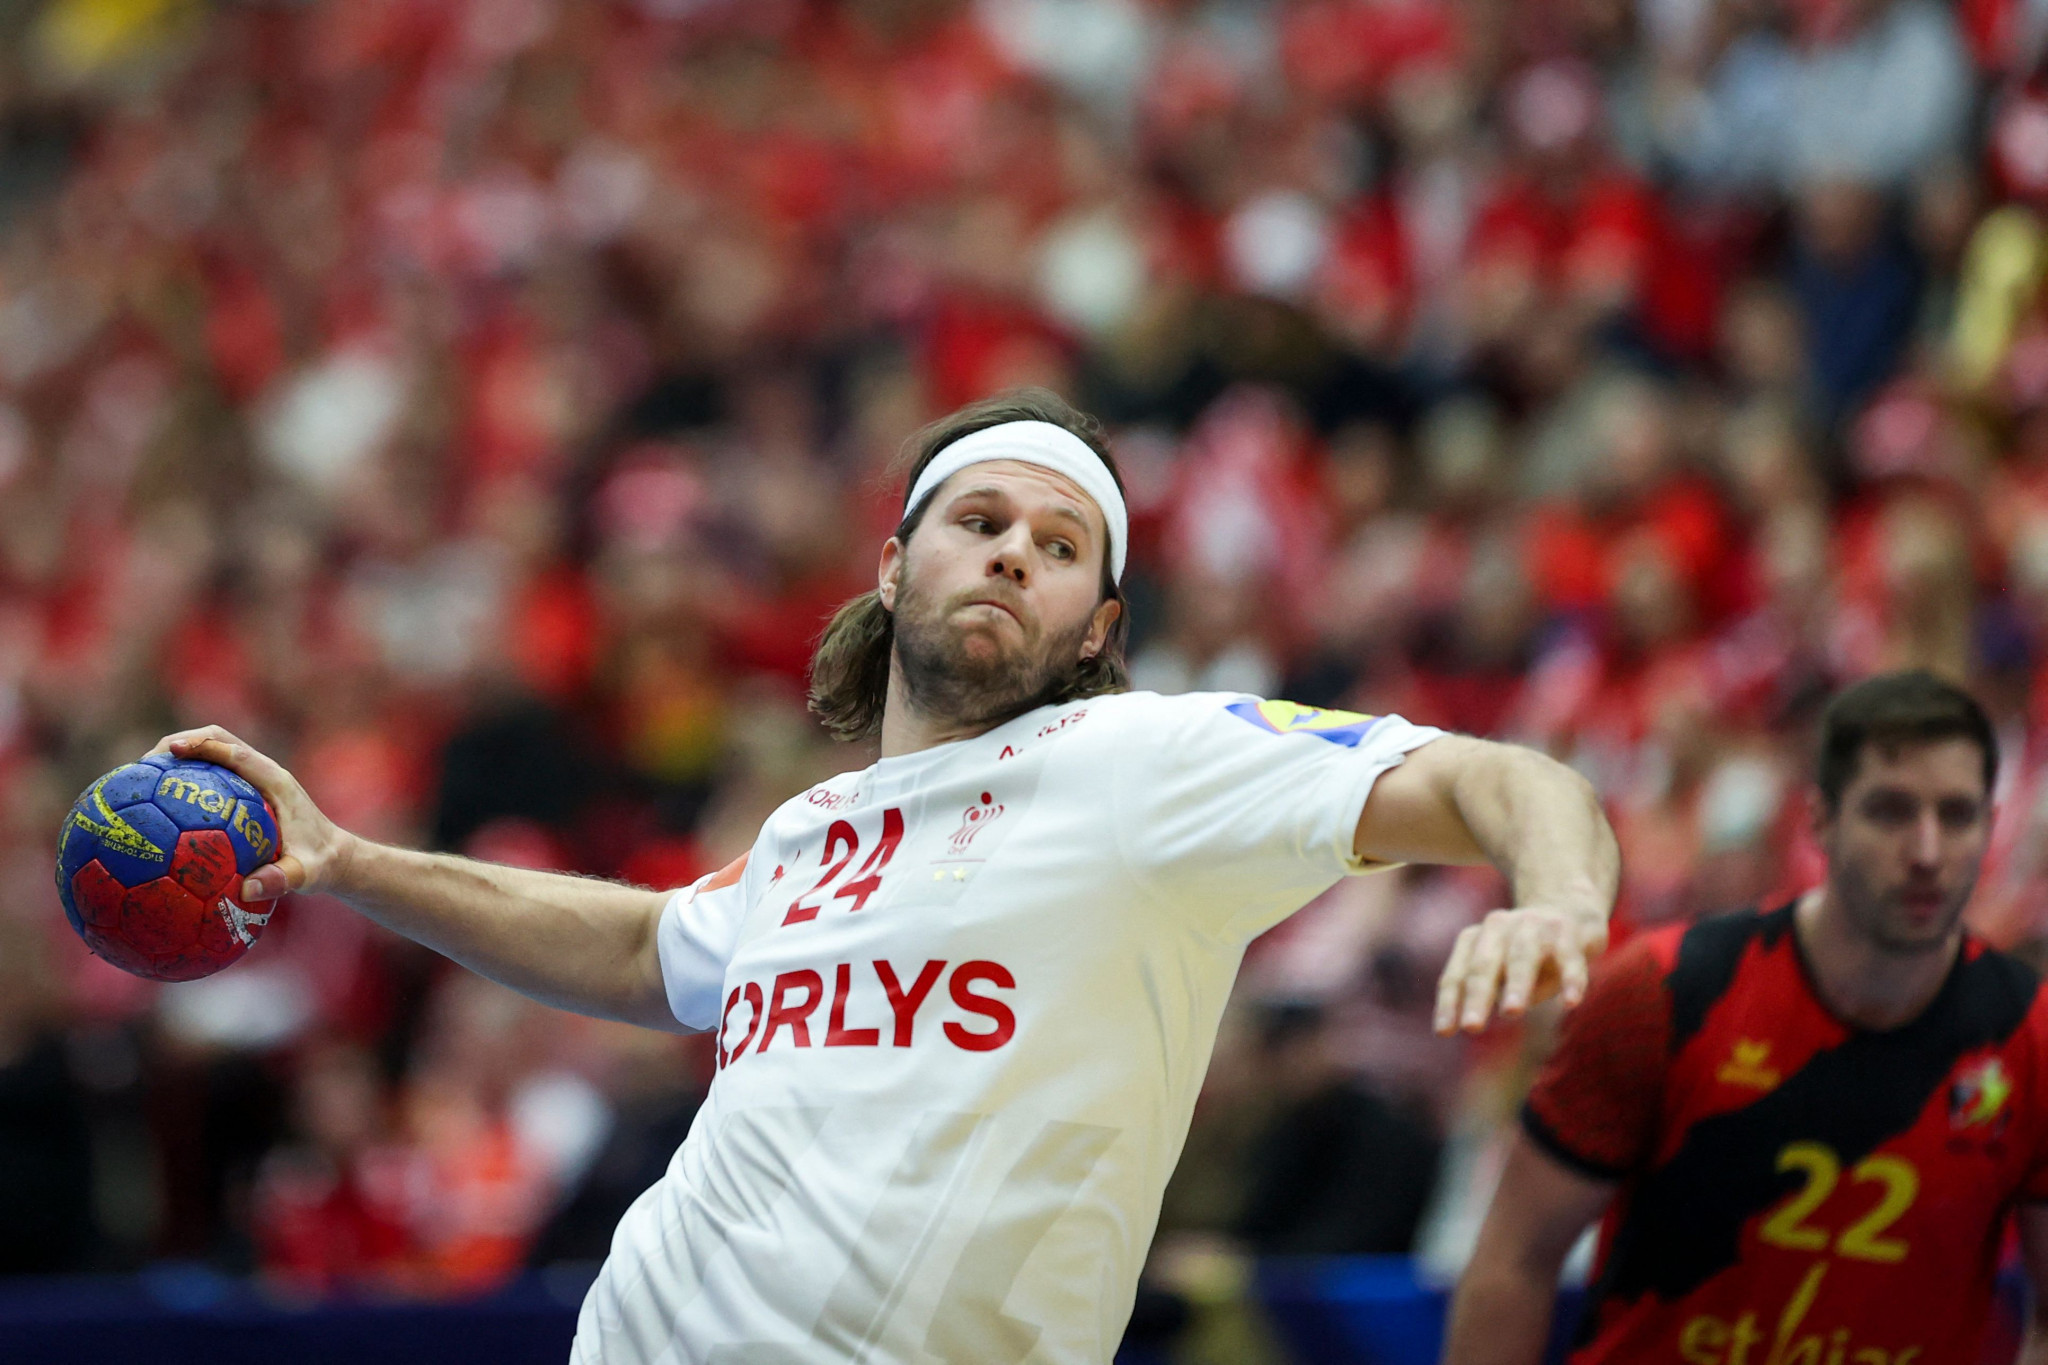 Denmark's Mikkel Hansen scored 10 goals as Denmark begun their campaign for a third consecutive title at the IHF Men's World Championship ©Getty Images